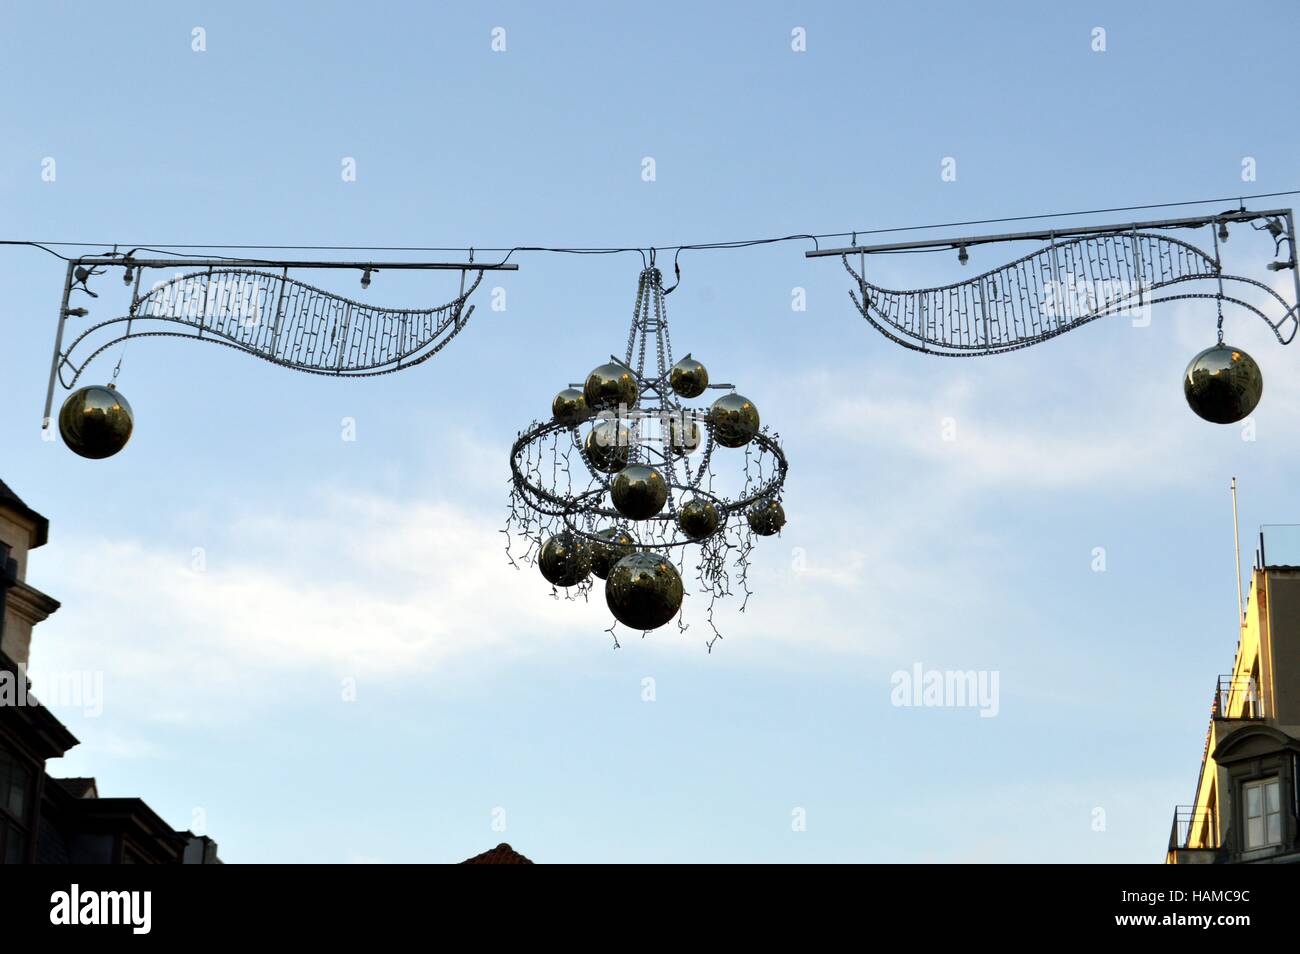 Outdoor christmas decoration hanging has a cable with gray balls Stock Photo